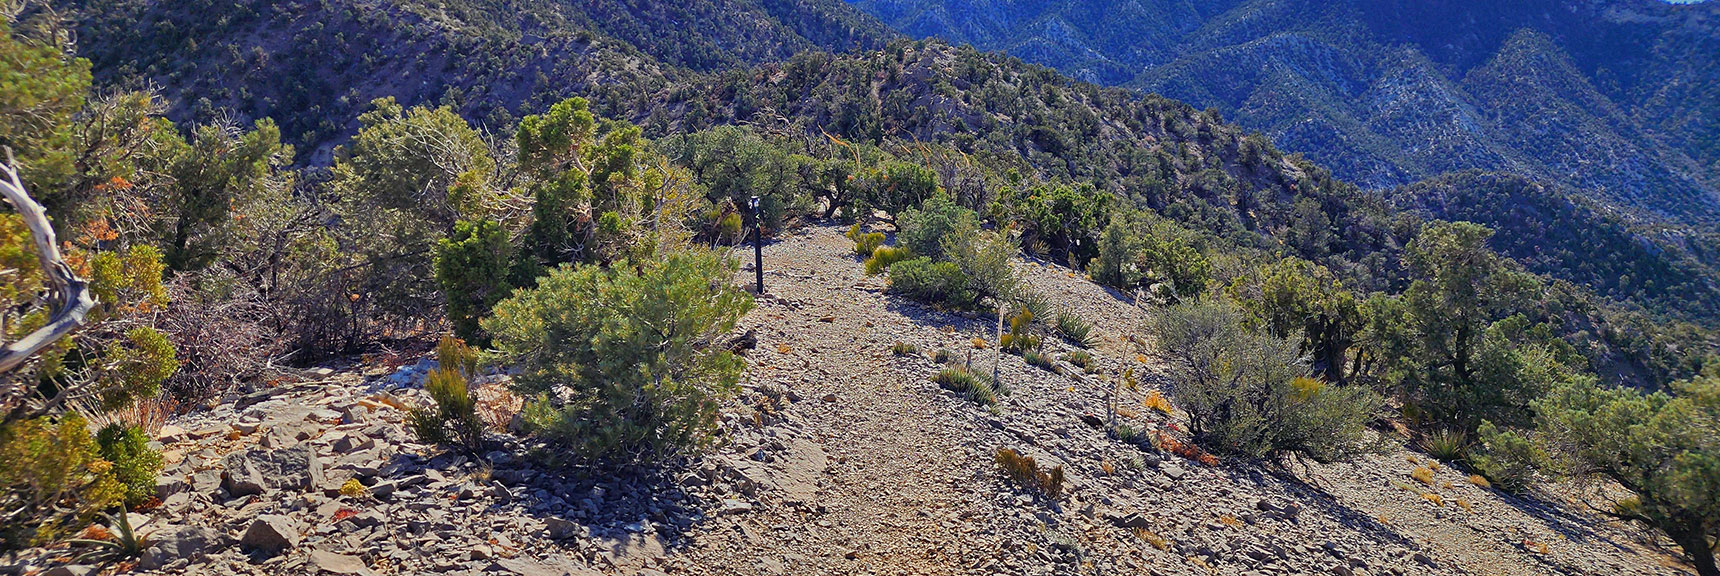 The Bridge Mountain Trail is a Very Good Trail, and Beautiful Even if You Don't Climb Bridge Mountain | Mid Upper Crest Ridgeline | Rainbow Mountain Wilderness, Nevada